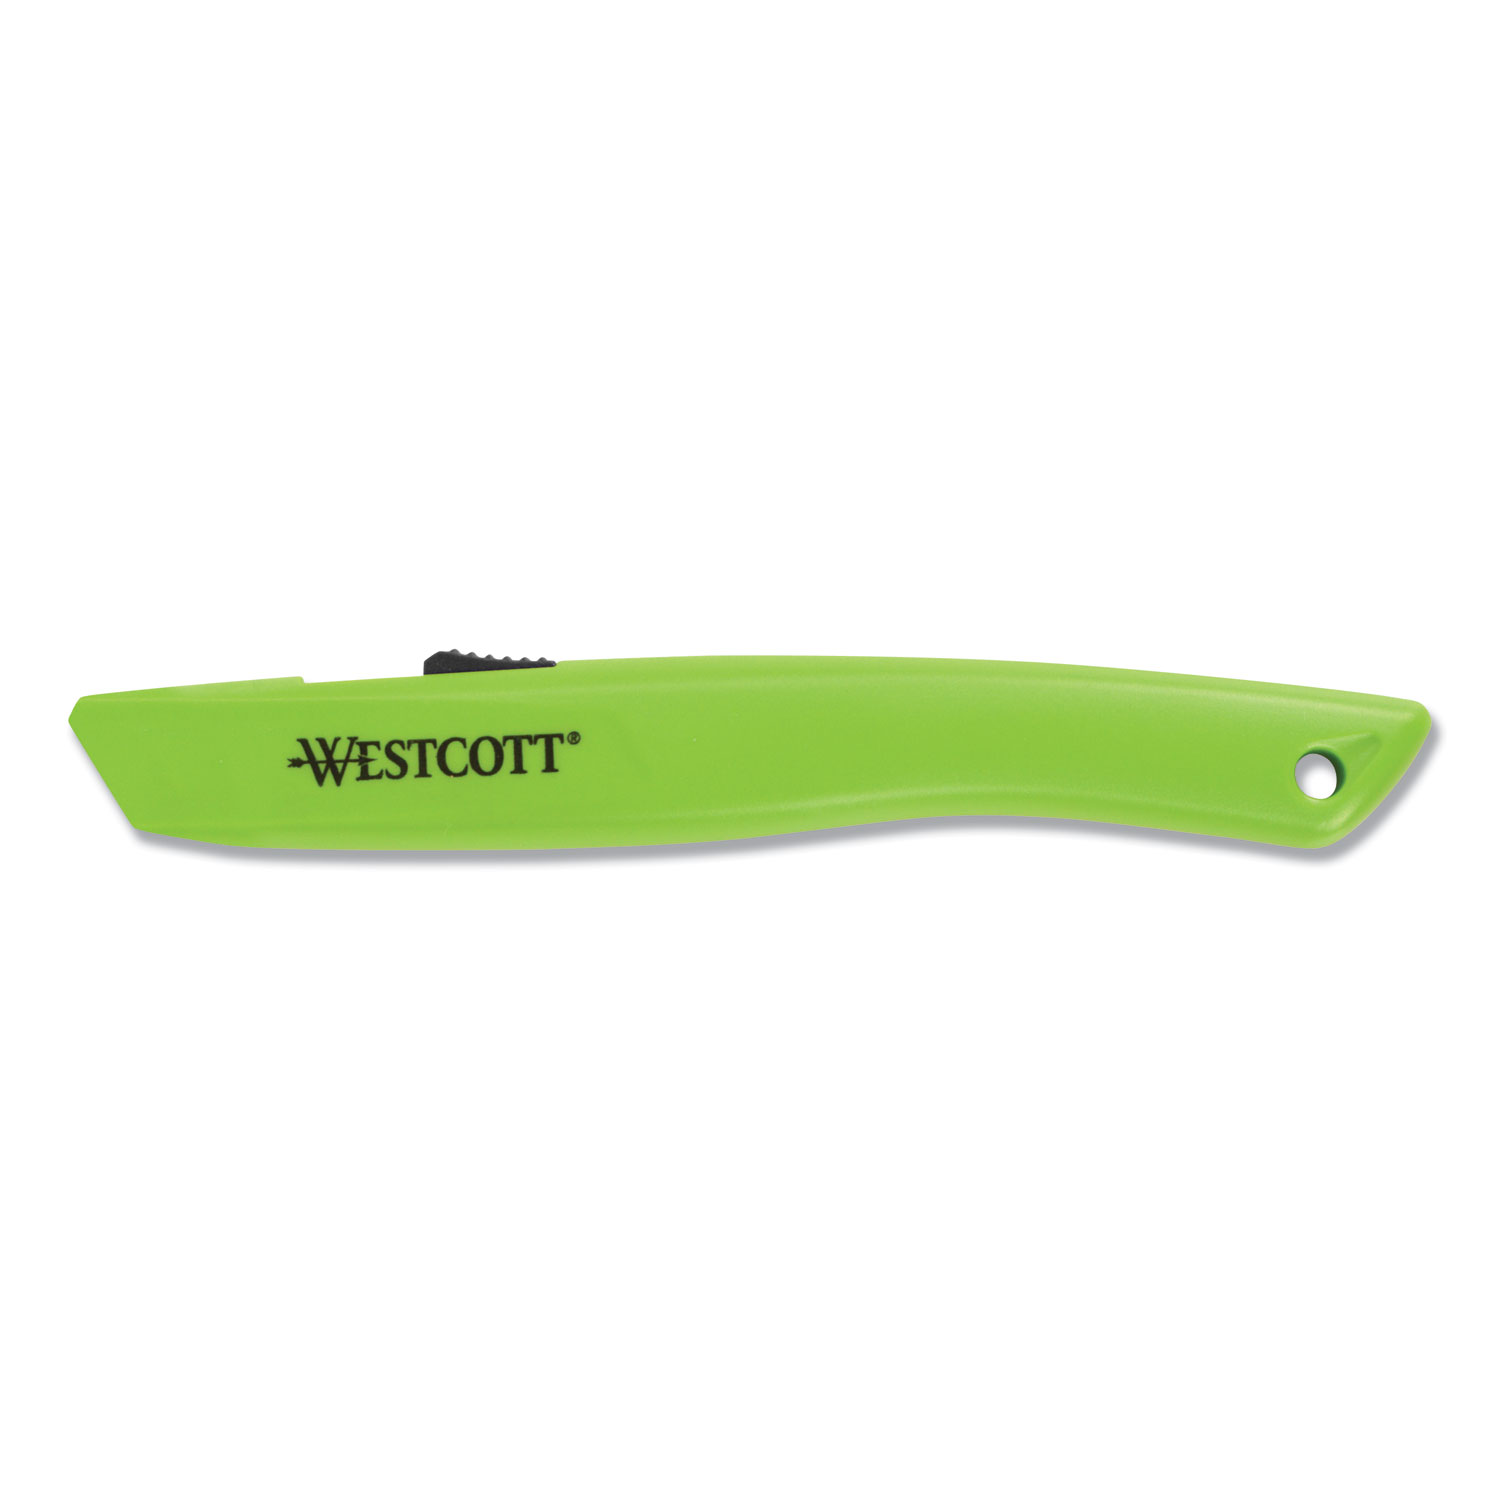 Compact Safety Ceramic Blade Box Cutter, Retractable Blade, 0.5 Blade,  2.5 Plastic Handle, Green - Zerbee